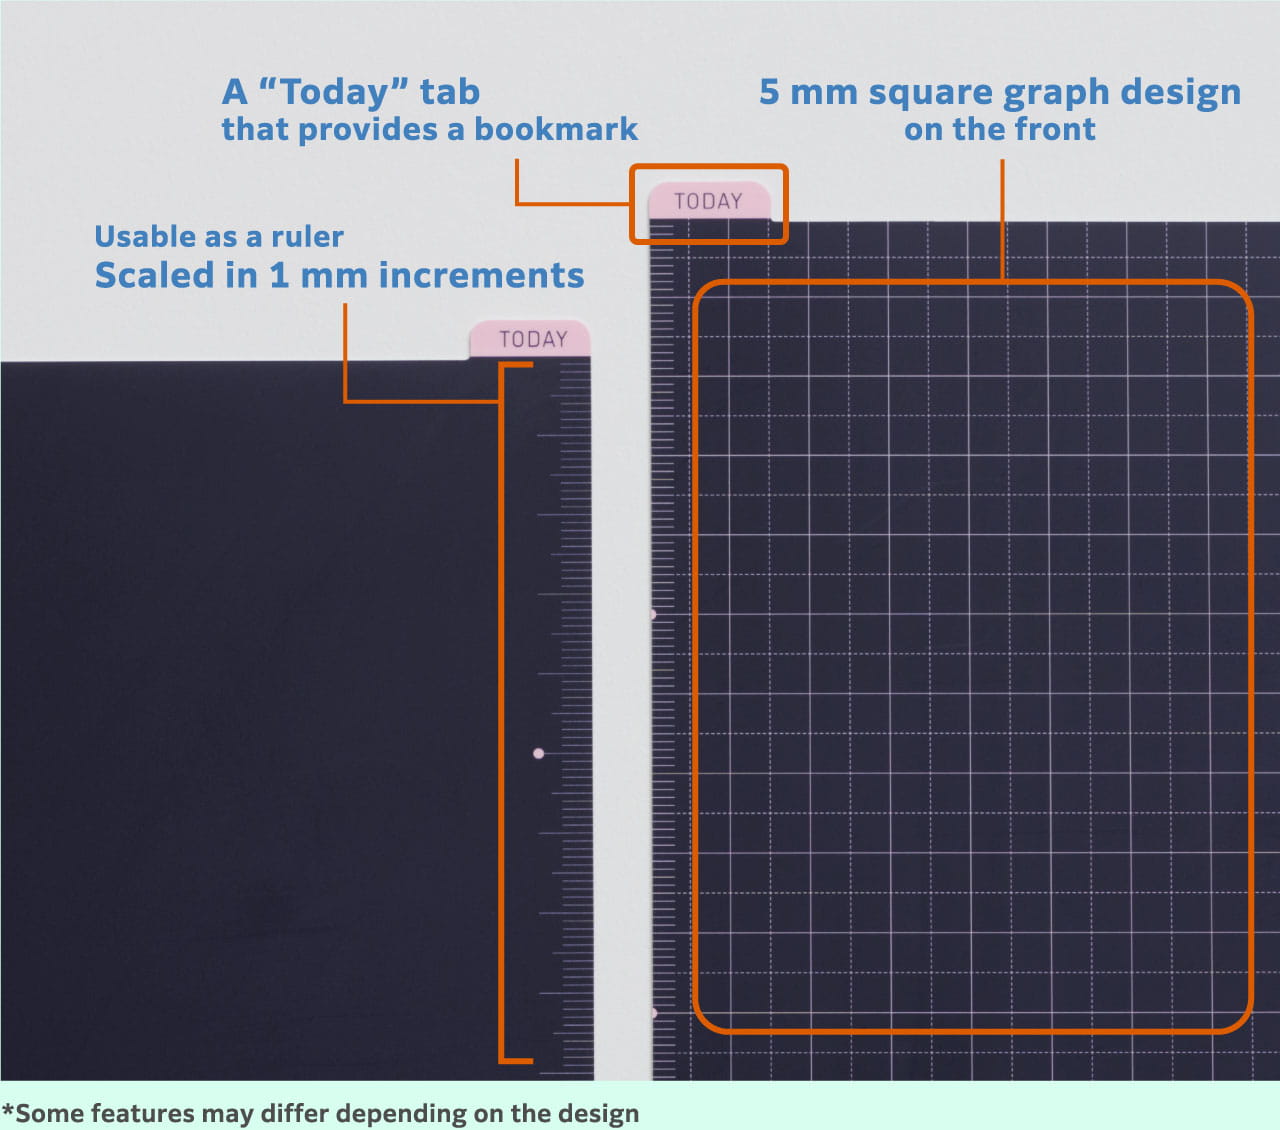 Usable as a ruler
                    Scaled in 1 mm increments
                    A “Today” tab that provides a bookmark
                    ５mm square graph design on the front
                    *Some features may differ depending on the design